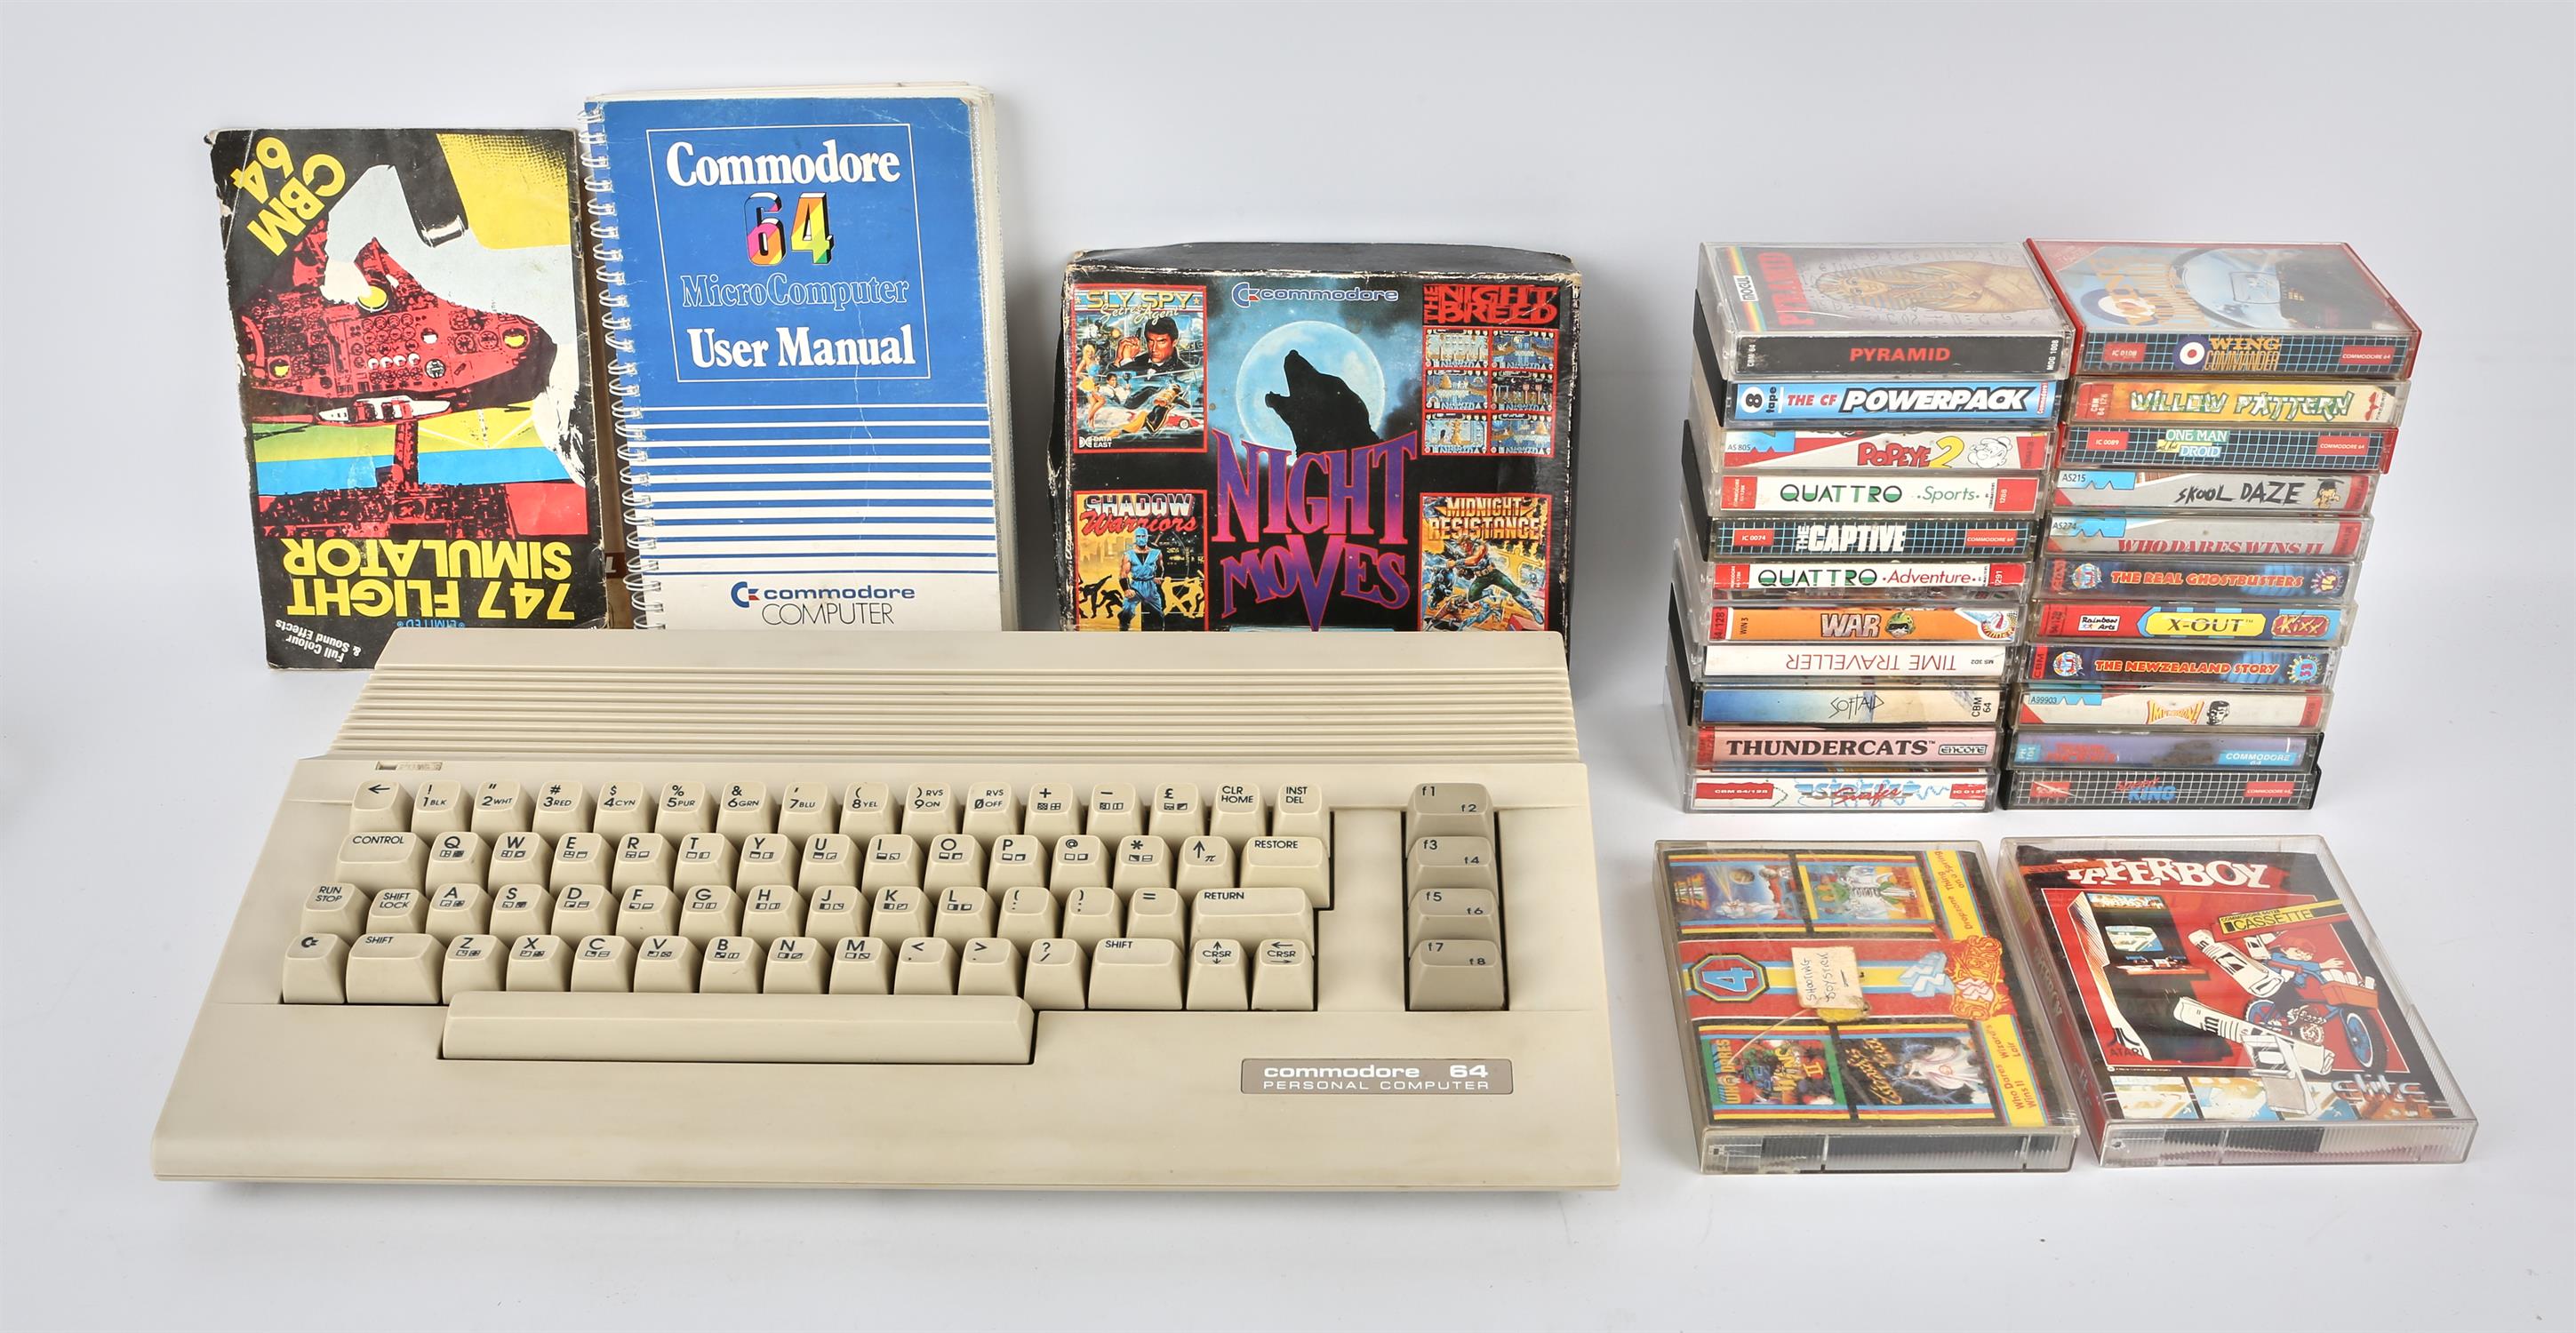 A Commodore 64 C64C computer with power supply/transformer, original instructions and 25 boxed